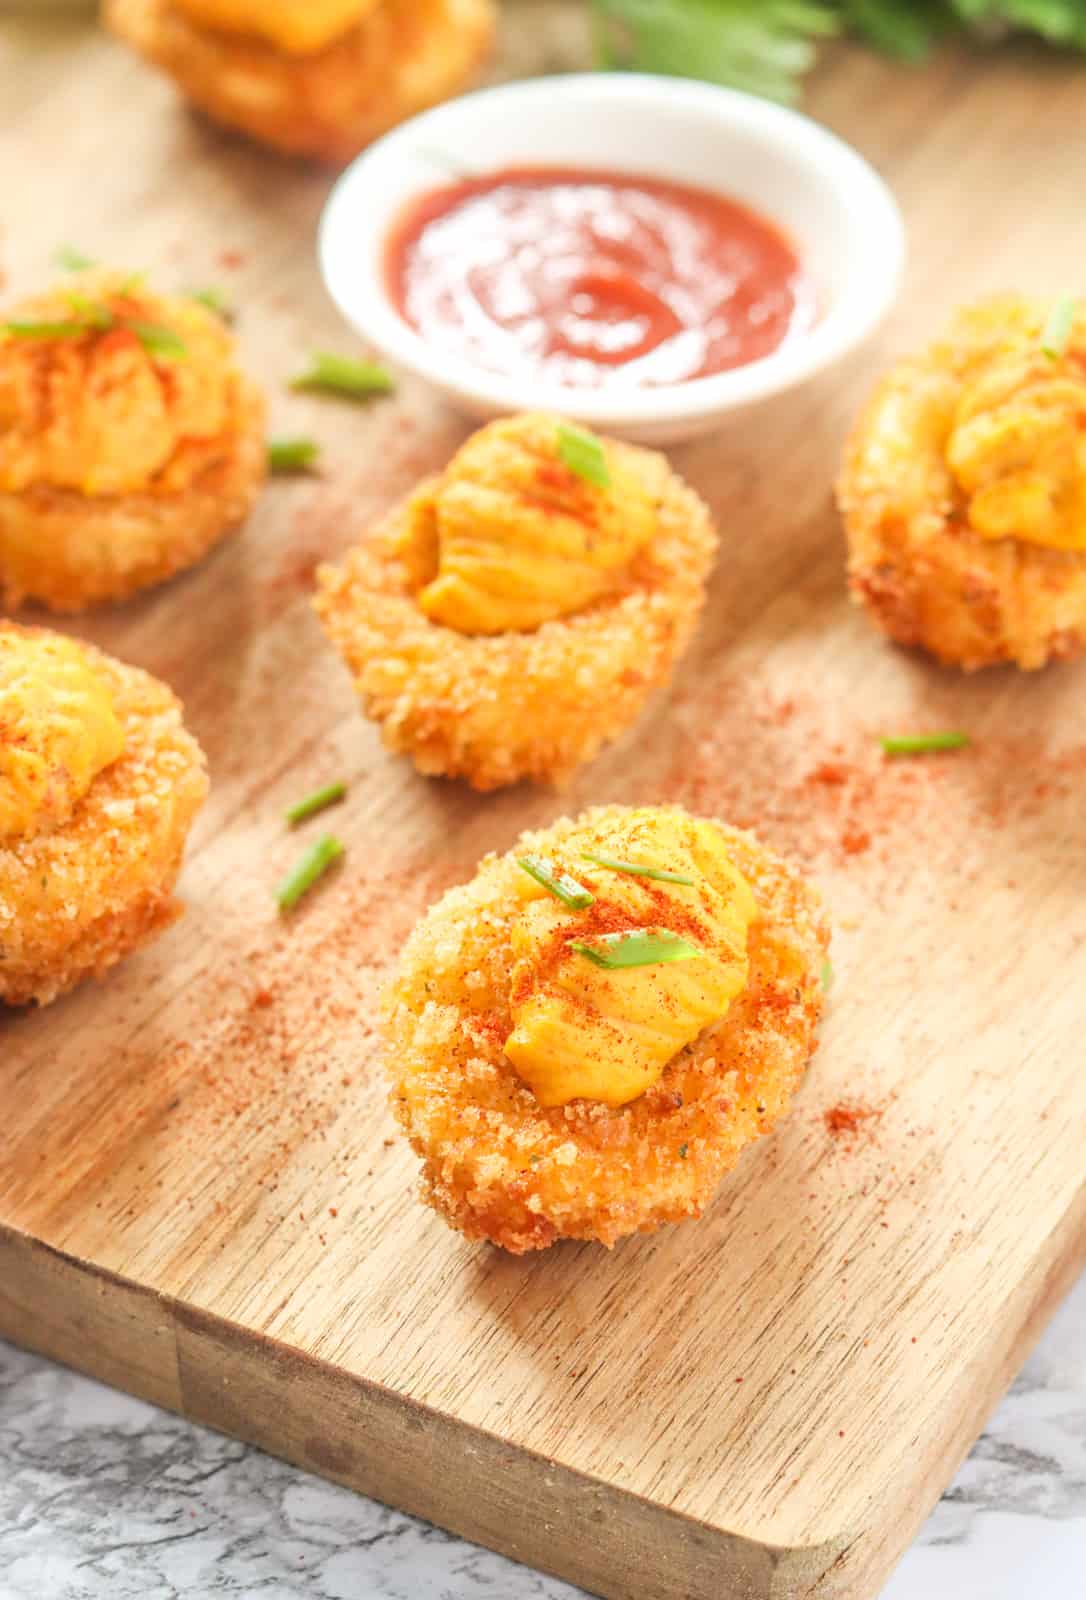 Fried deviled eggs make an insanely delicious appetizer